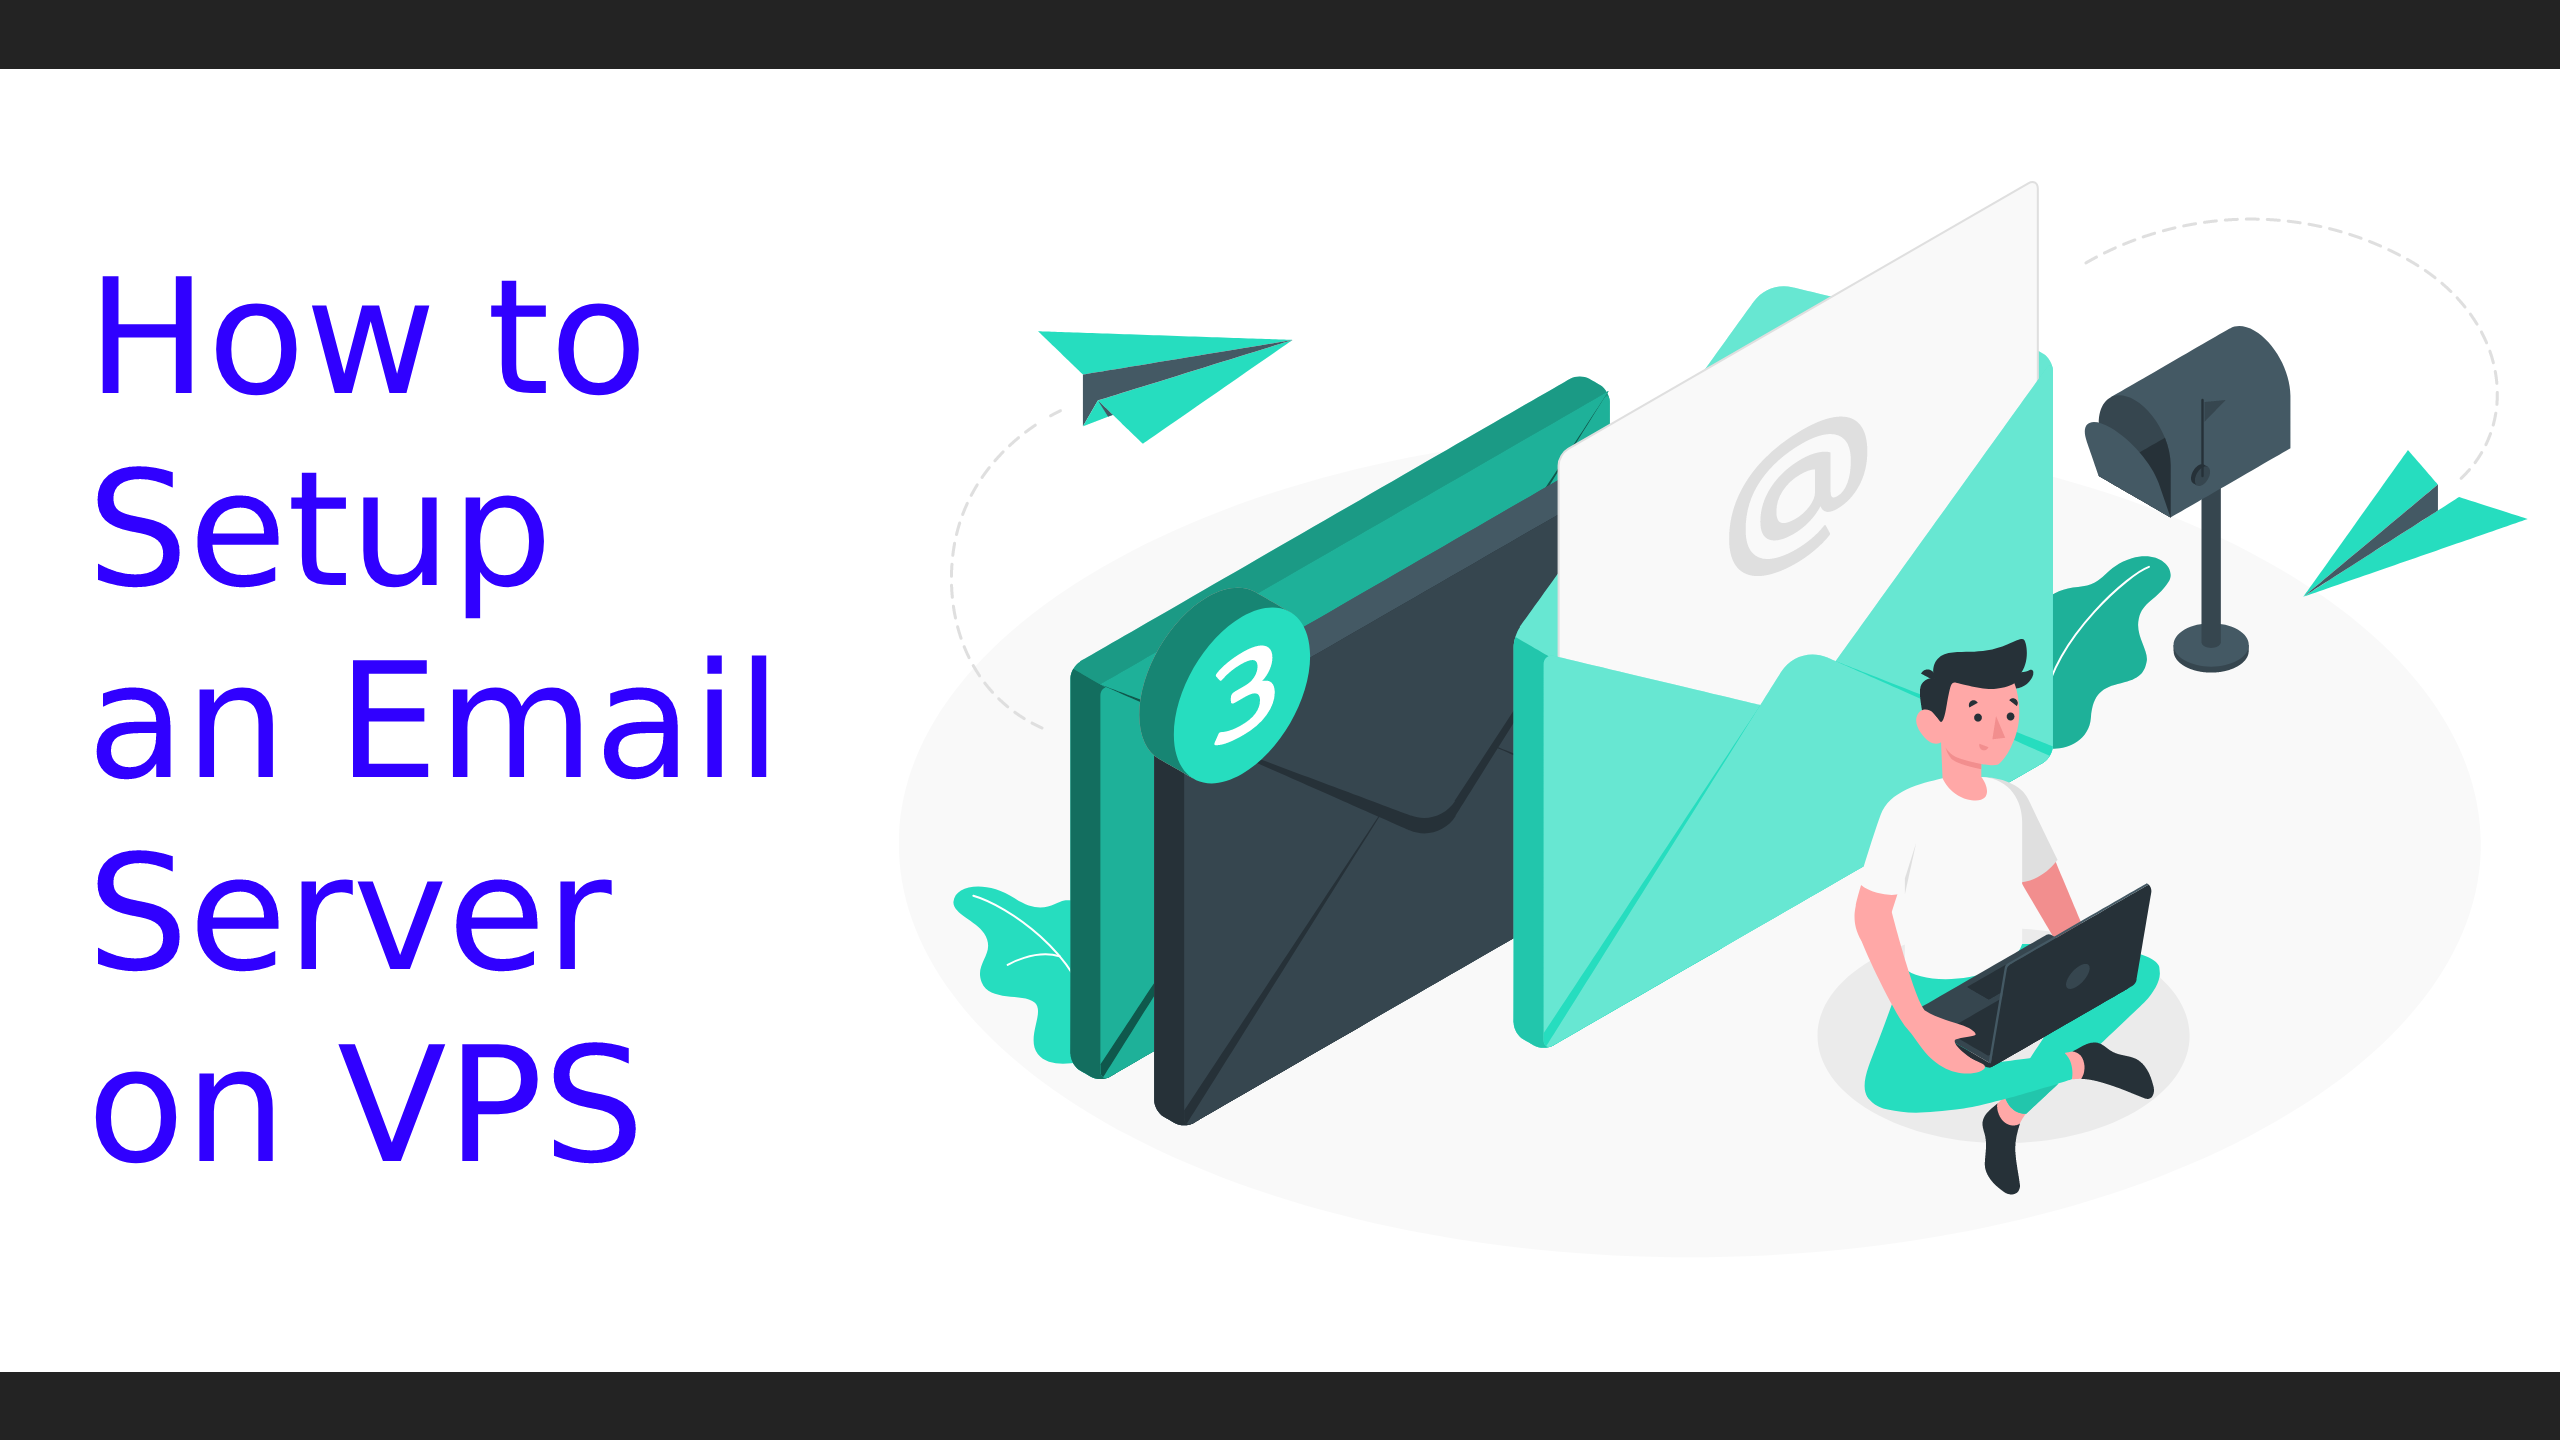 How To Setup an Email Server on VPS – The Complete Tutorial Video